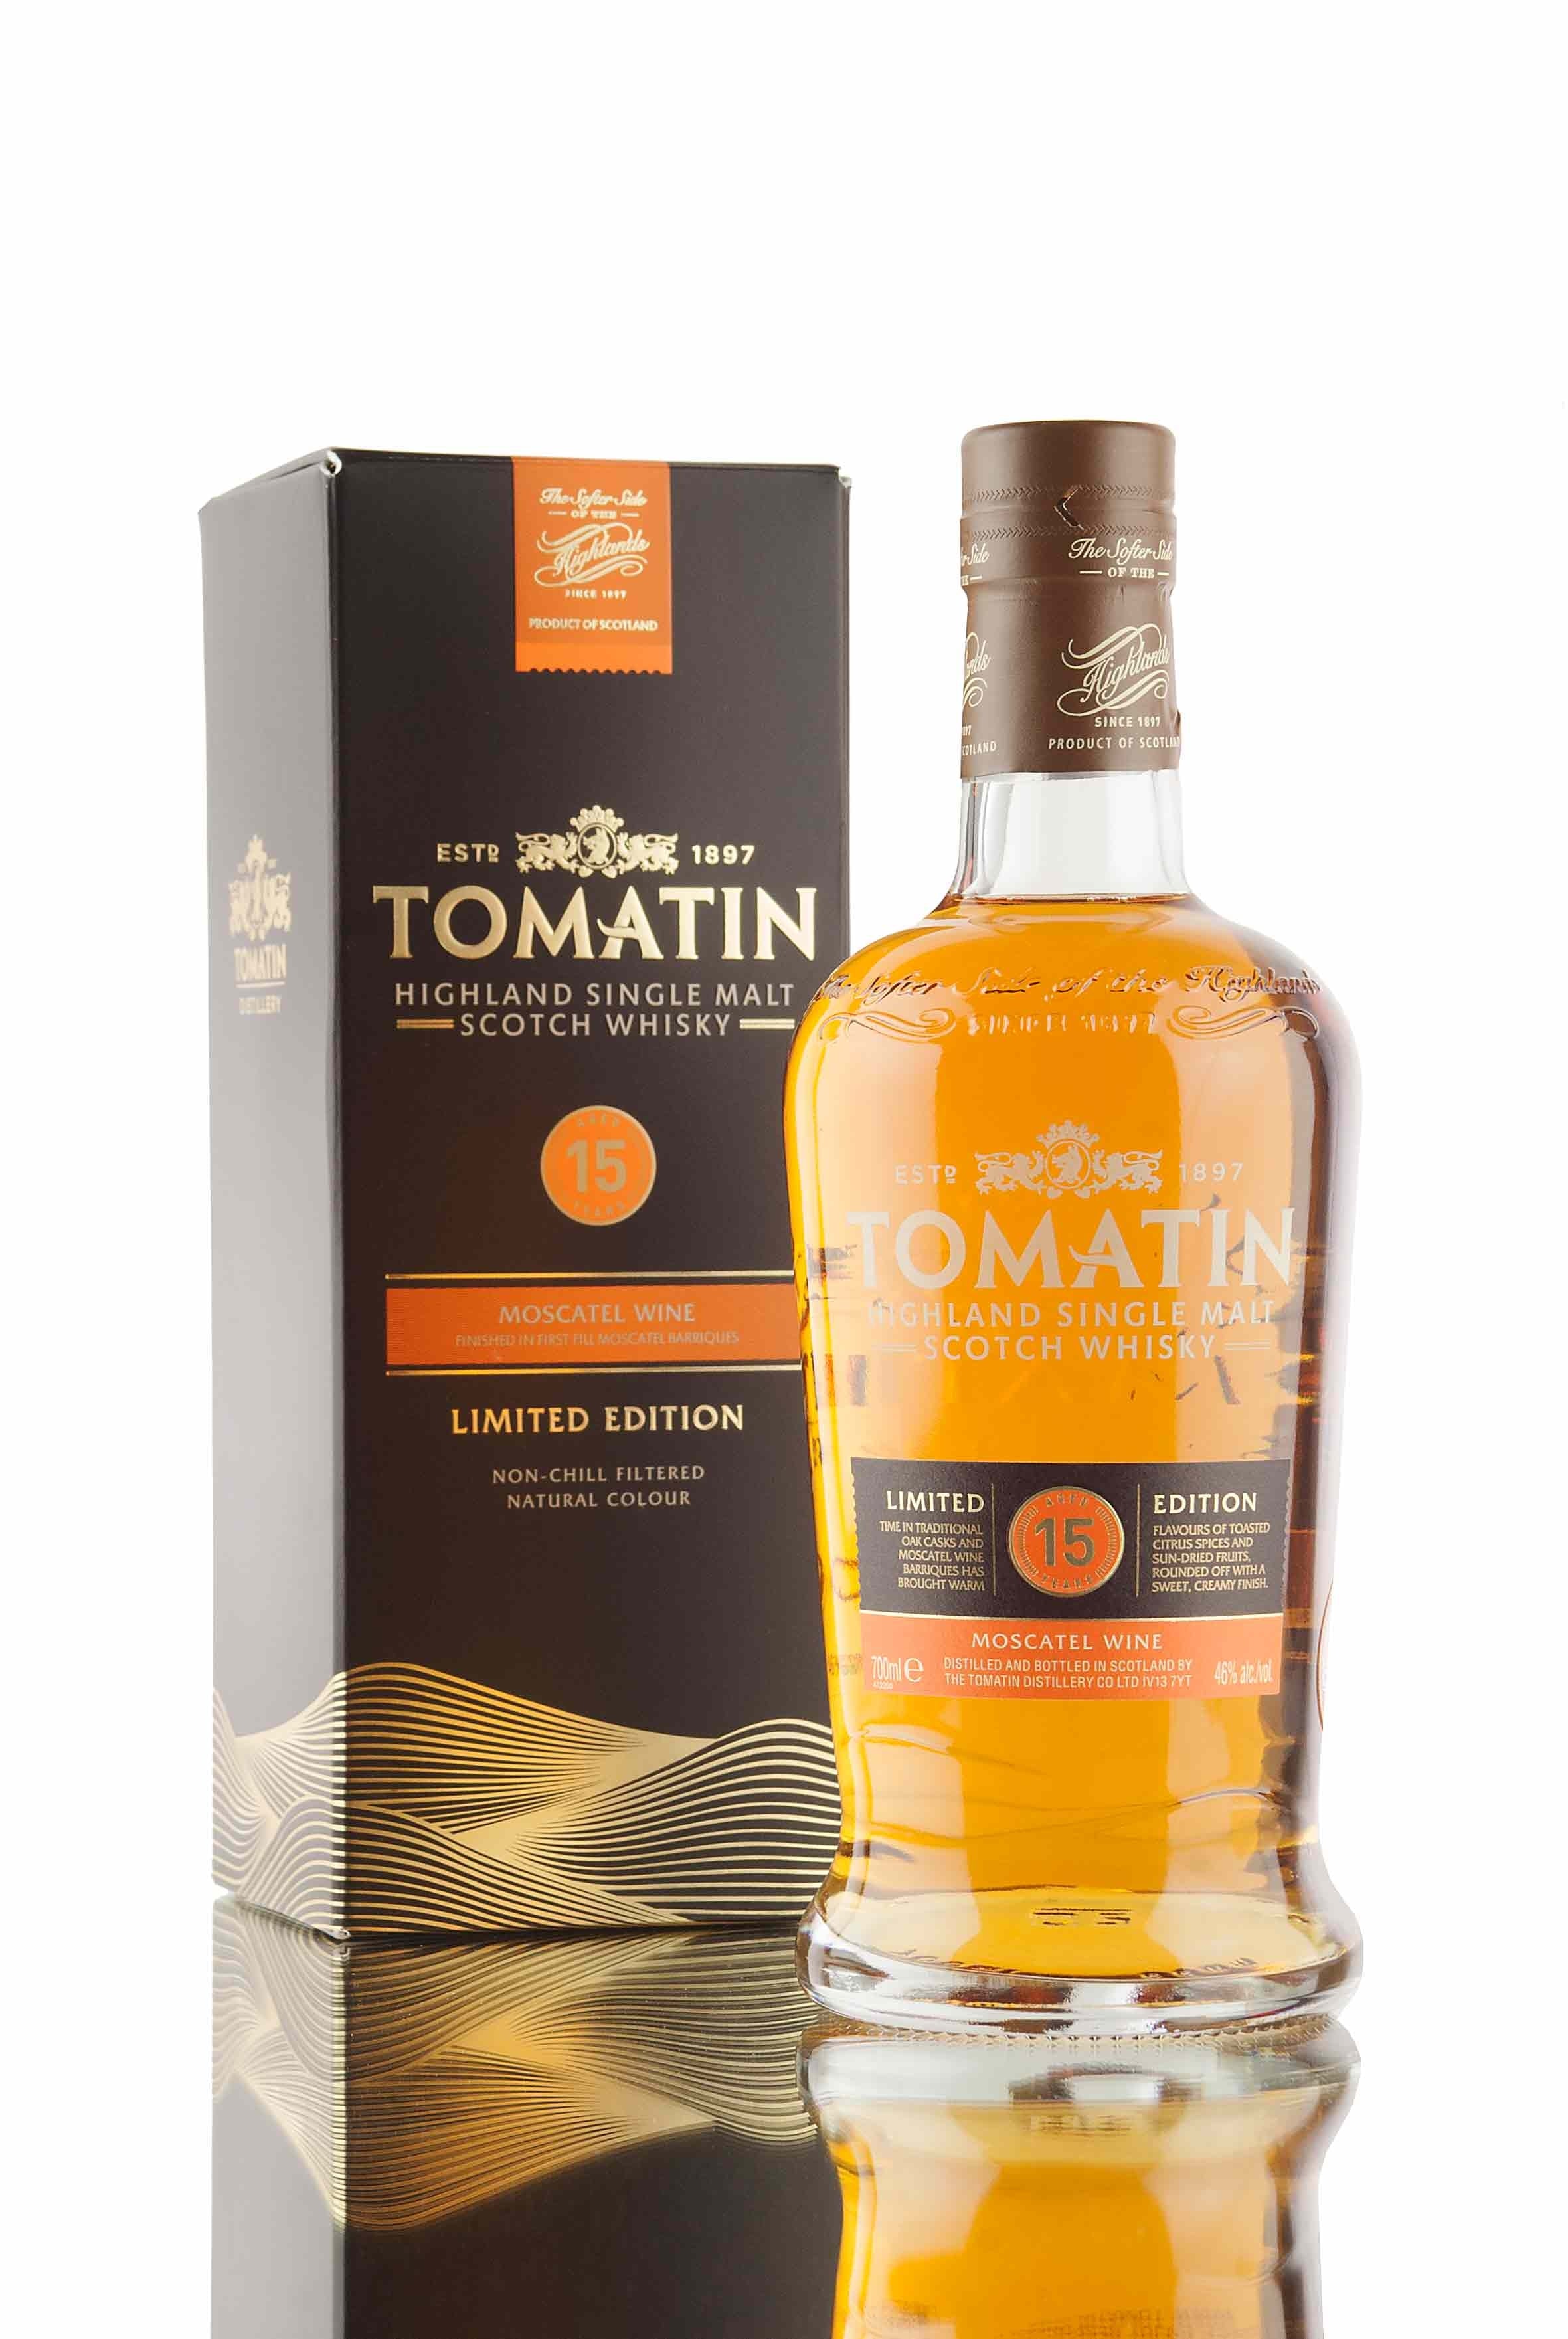 Tomatin 15 Year Old Moscatel Wine